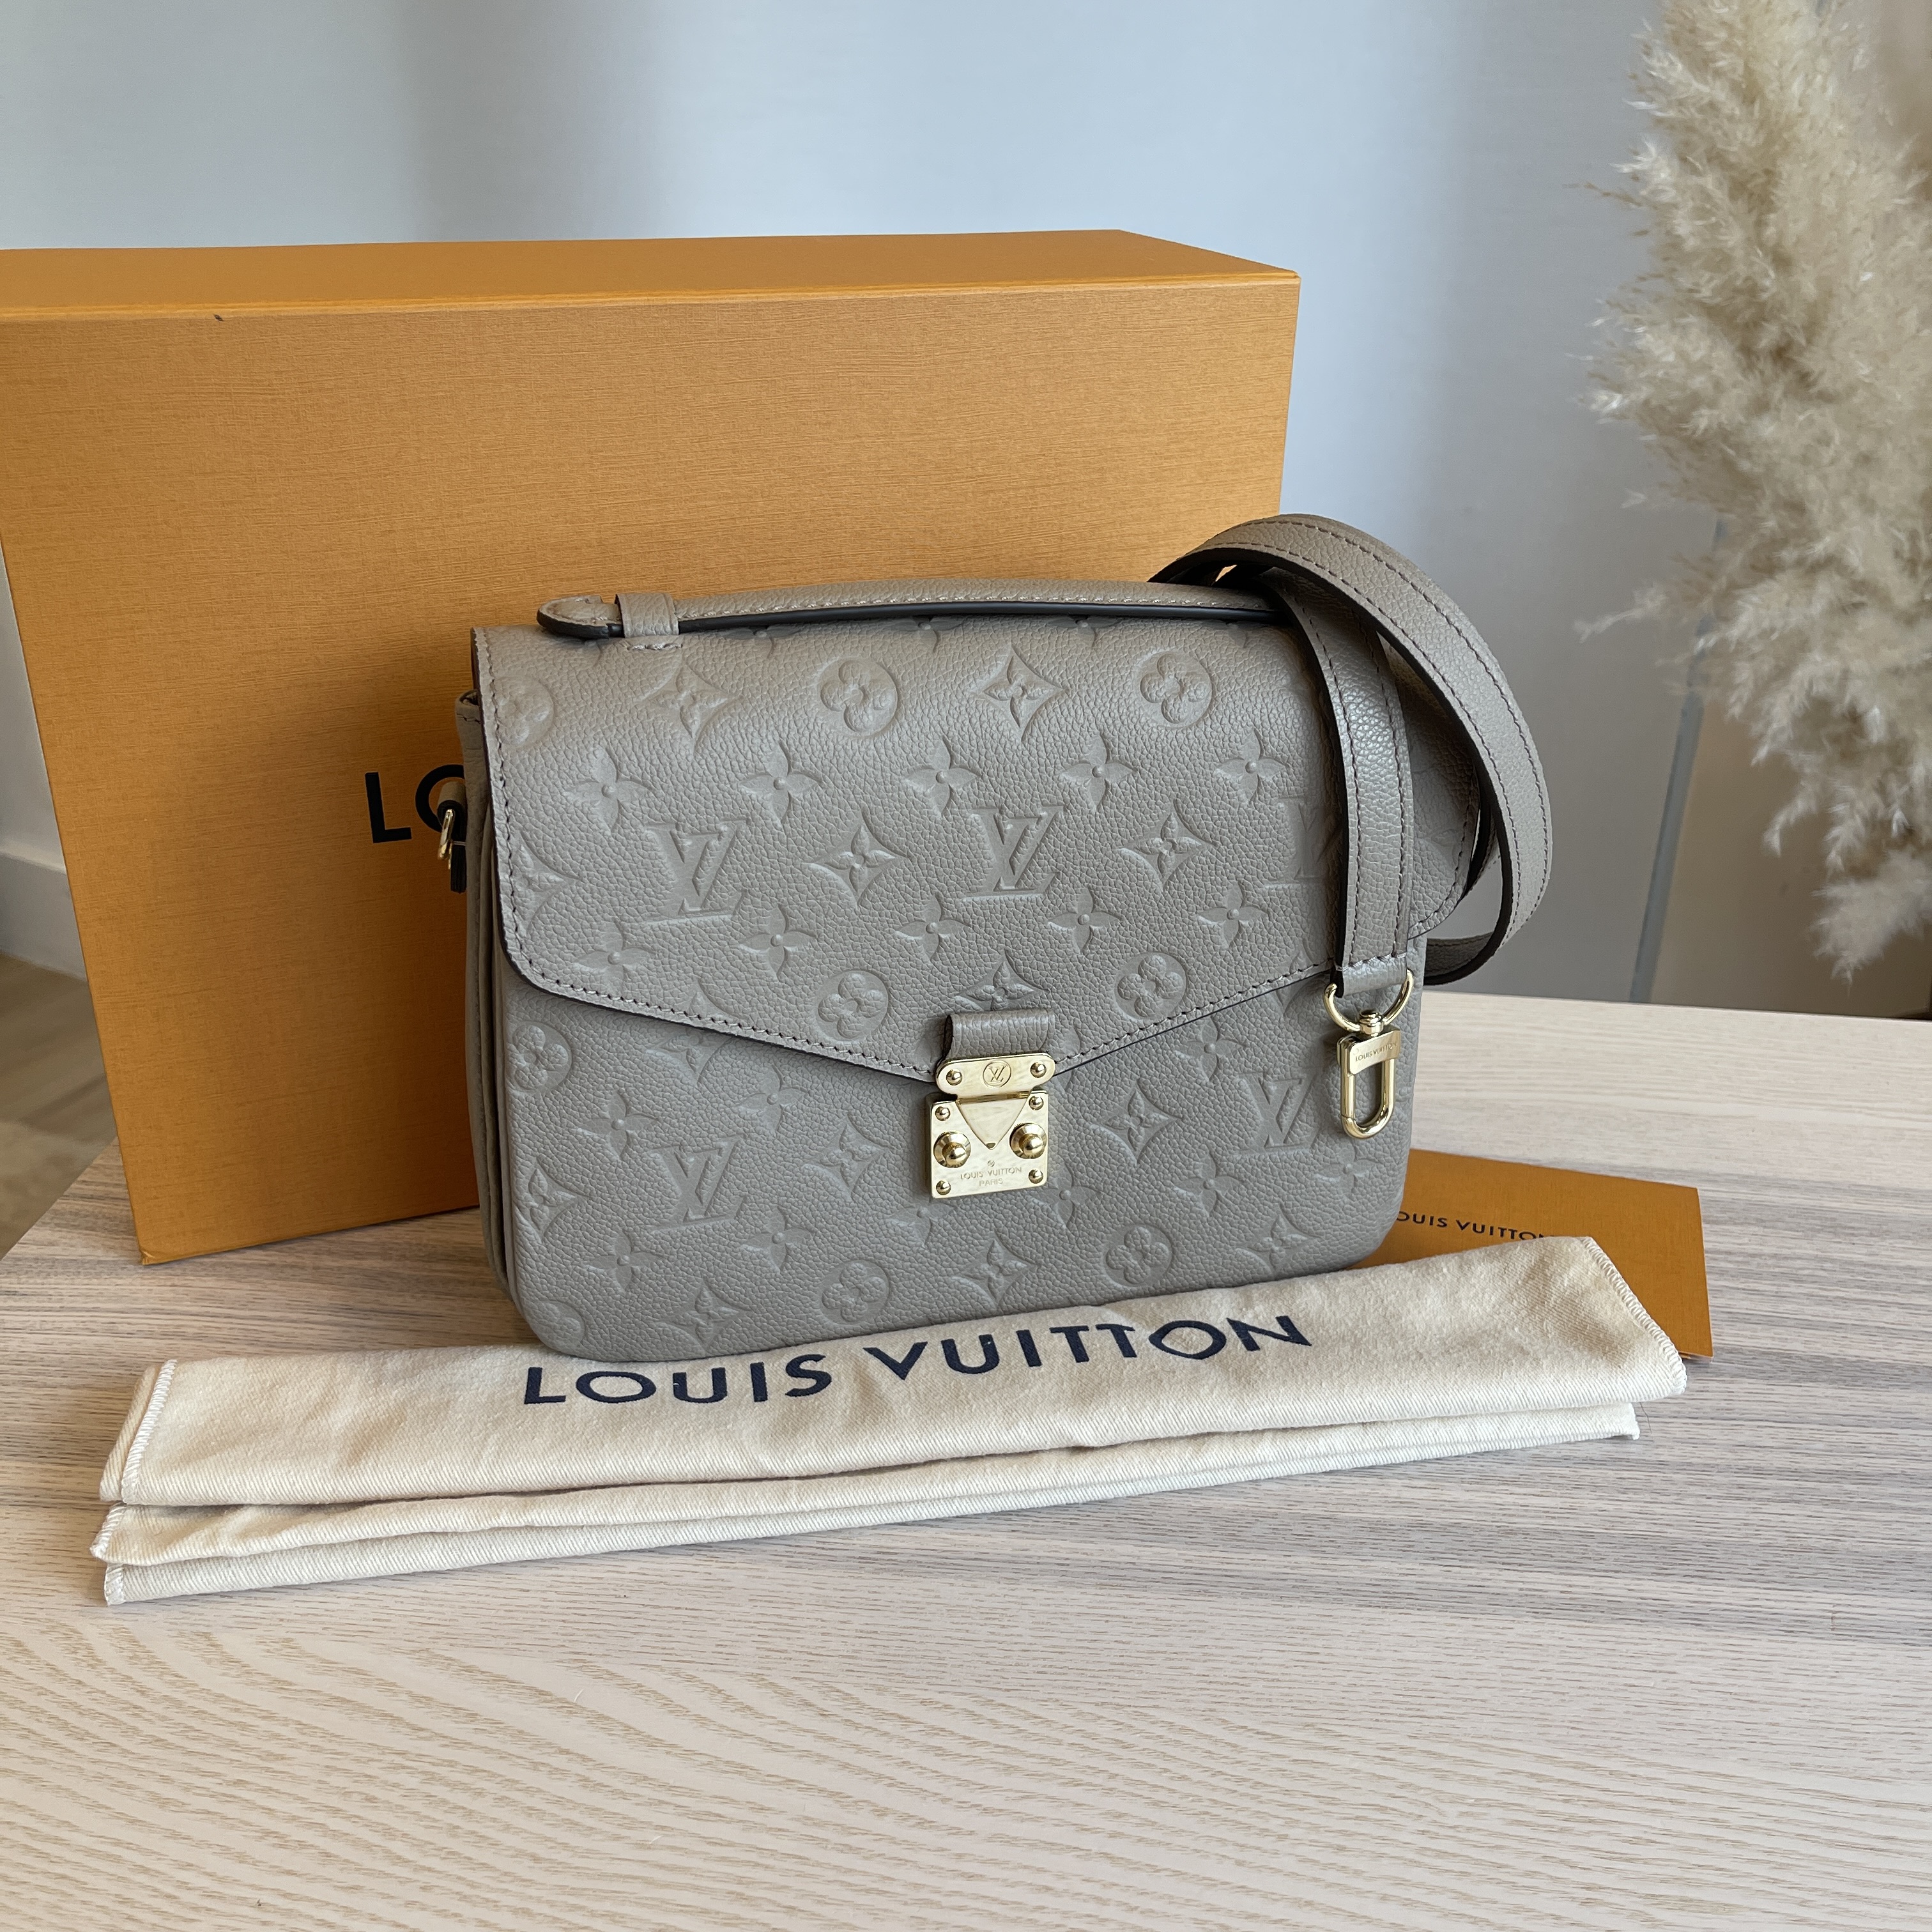 REFERENCE] Authentic Louis Vuitton Pochette Metis Turtledove with